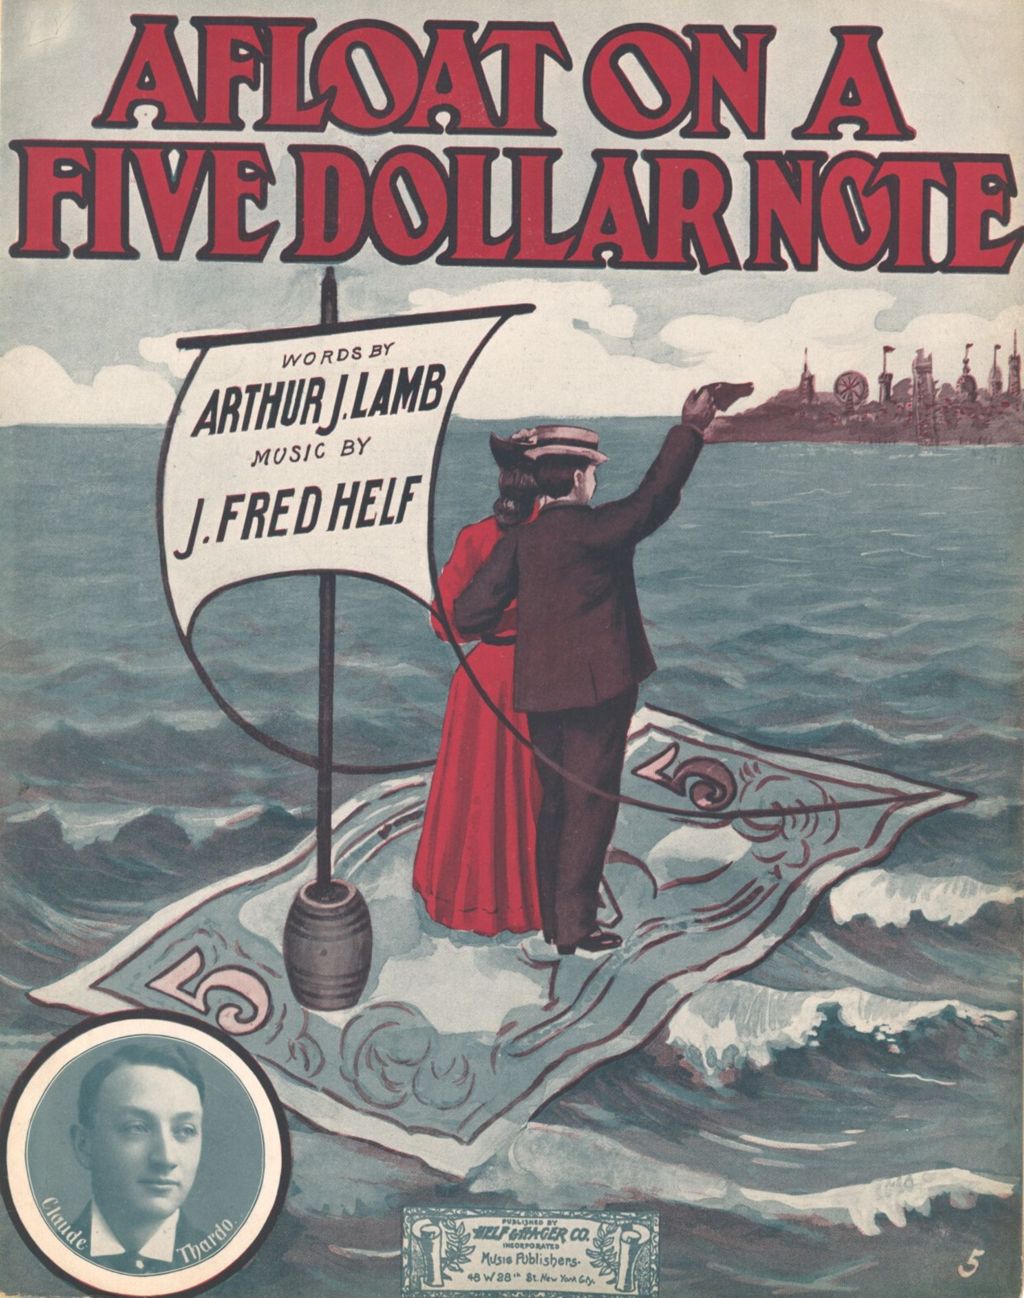 Miniature of Afloat on a Five Dollar Note